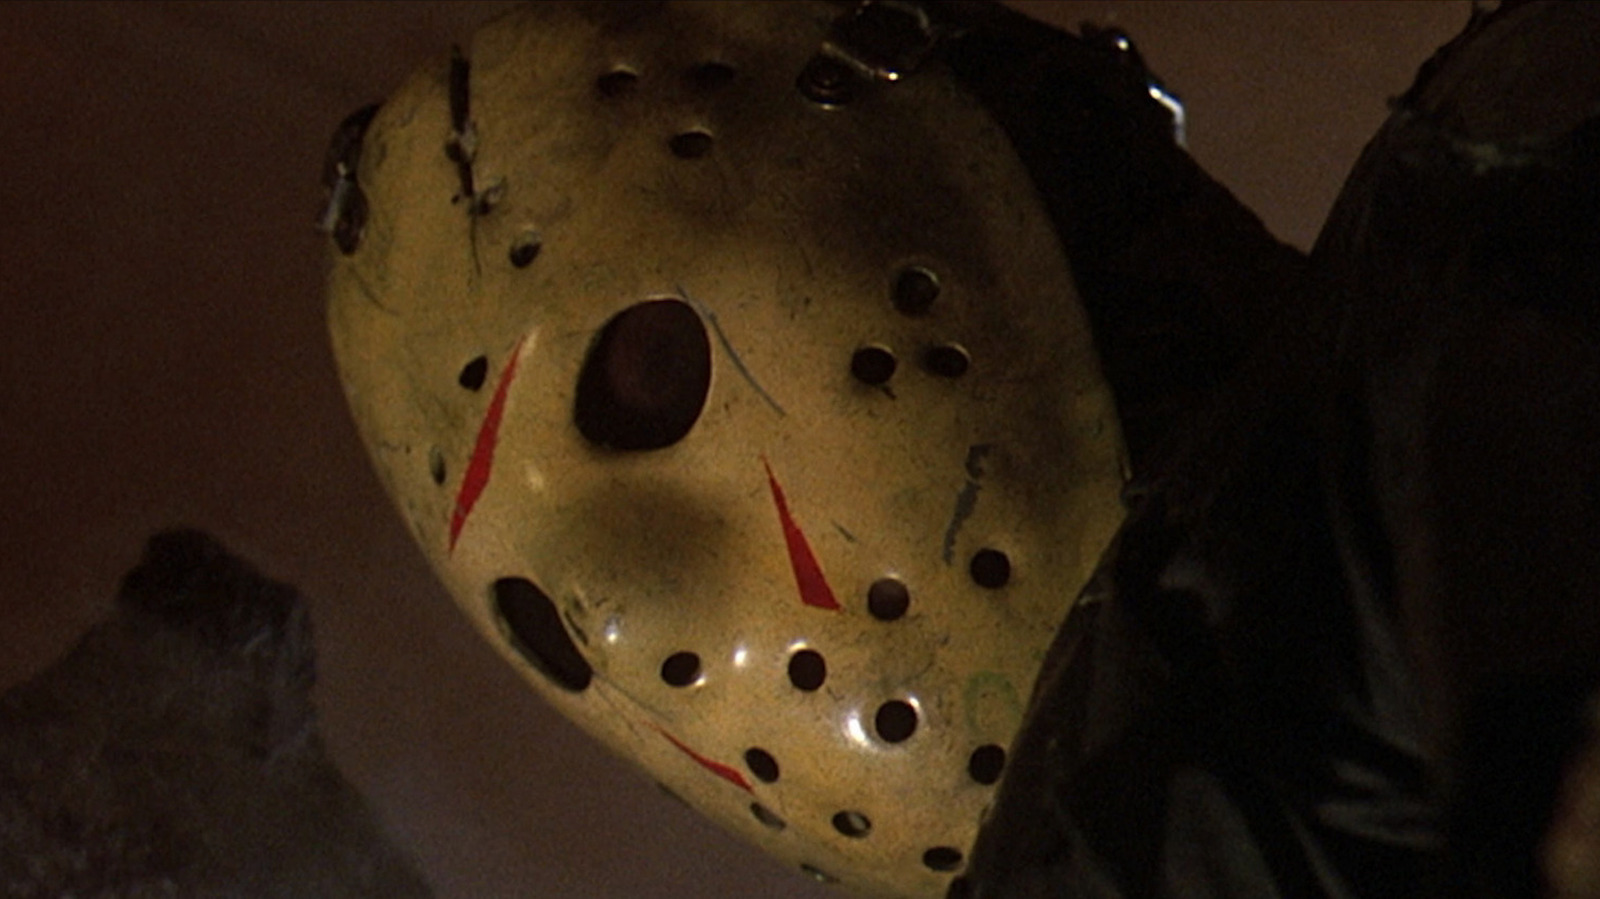 Friday the 13th series: The good, the bad and the one where Jason goes to  space